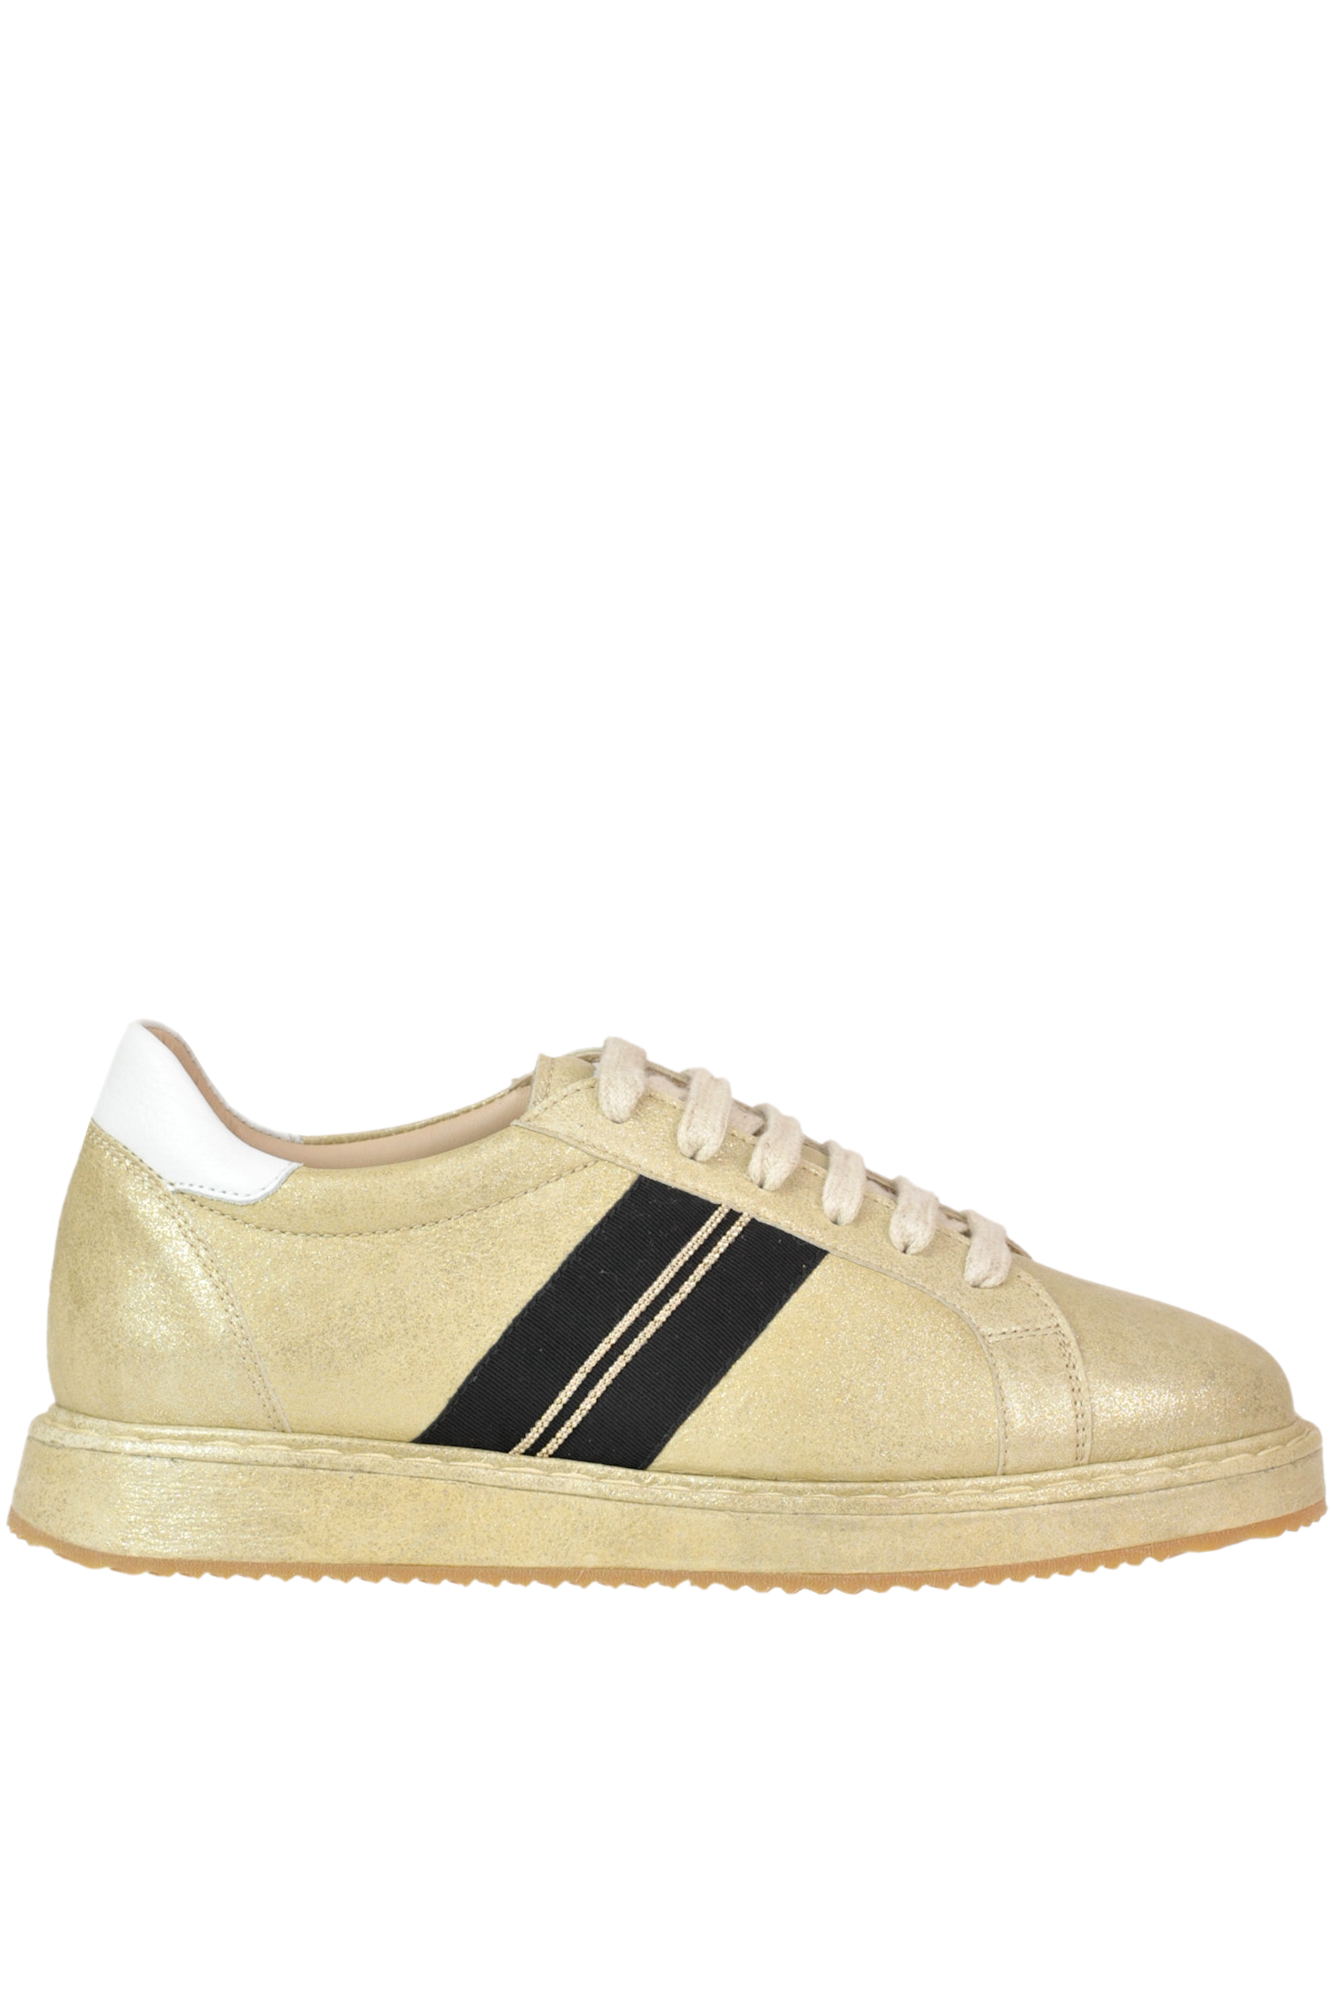 Brunello Cucinelli Metallic Effect Leather Sneakers In Gold